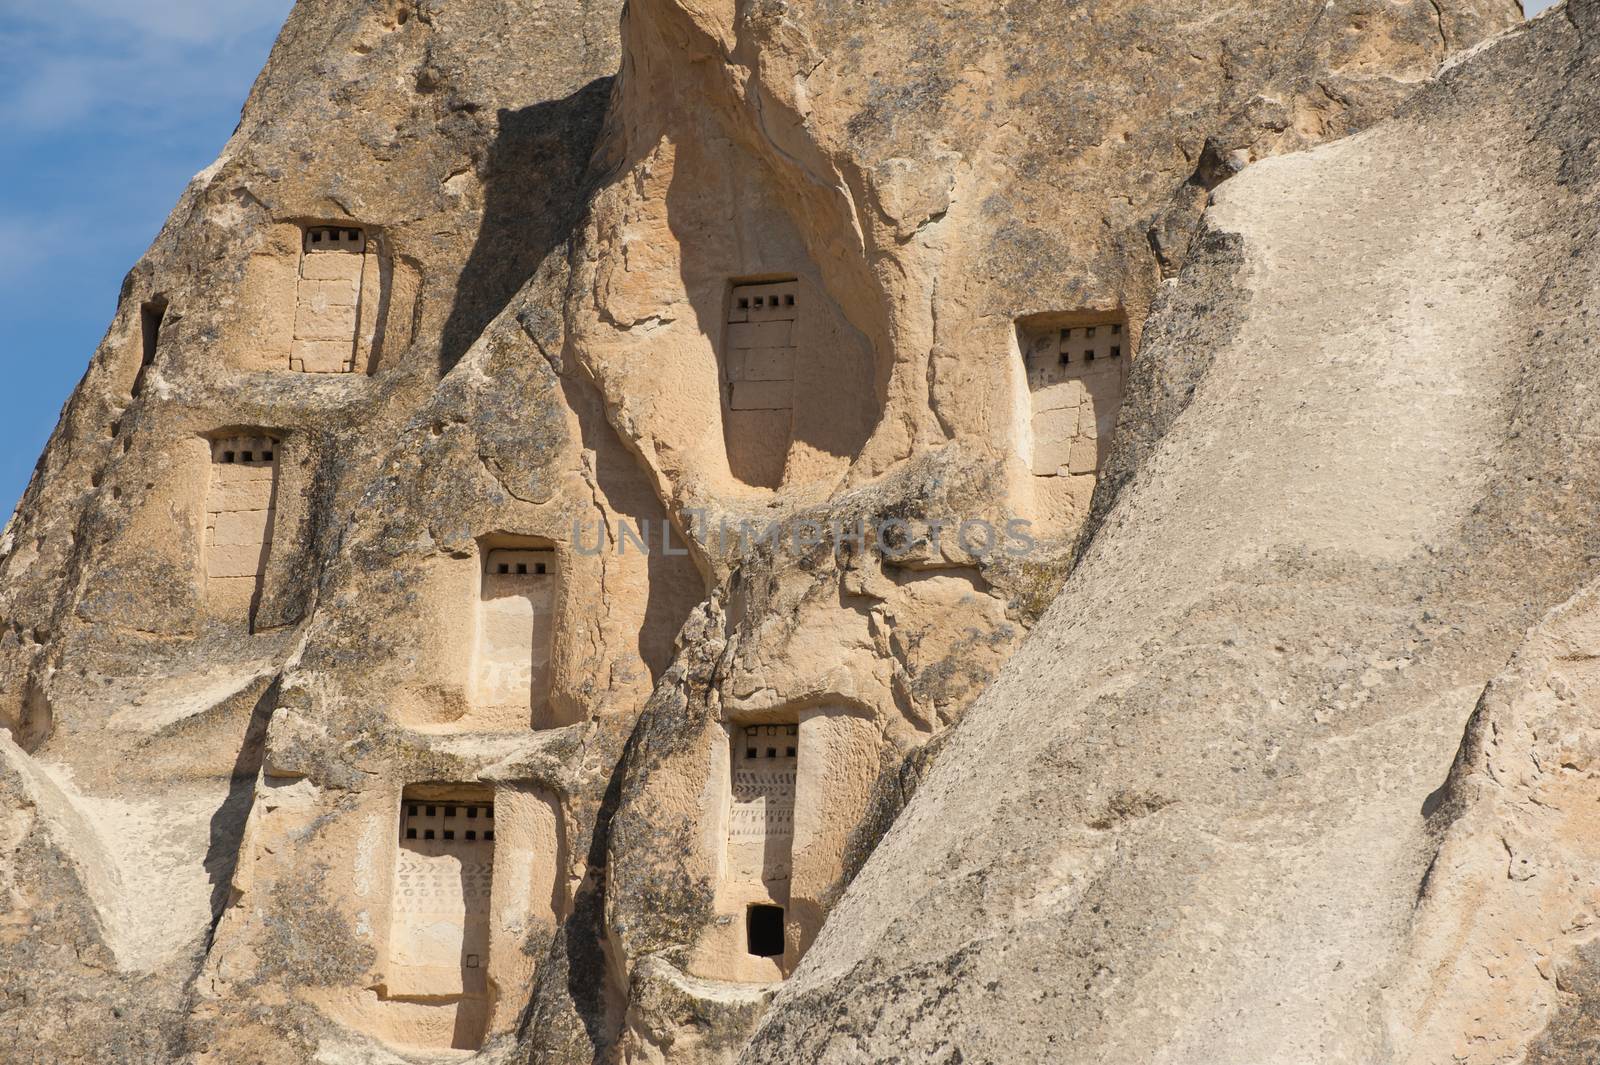 Detail of the ancient  homes dug into the mountains, Cappadocia, Turkey